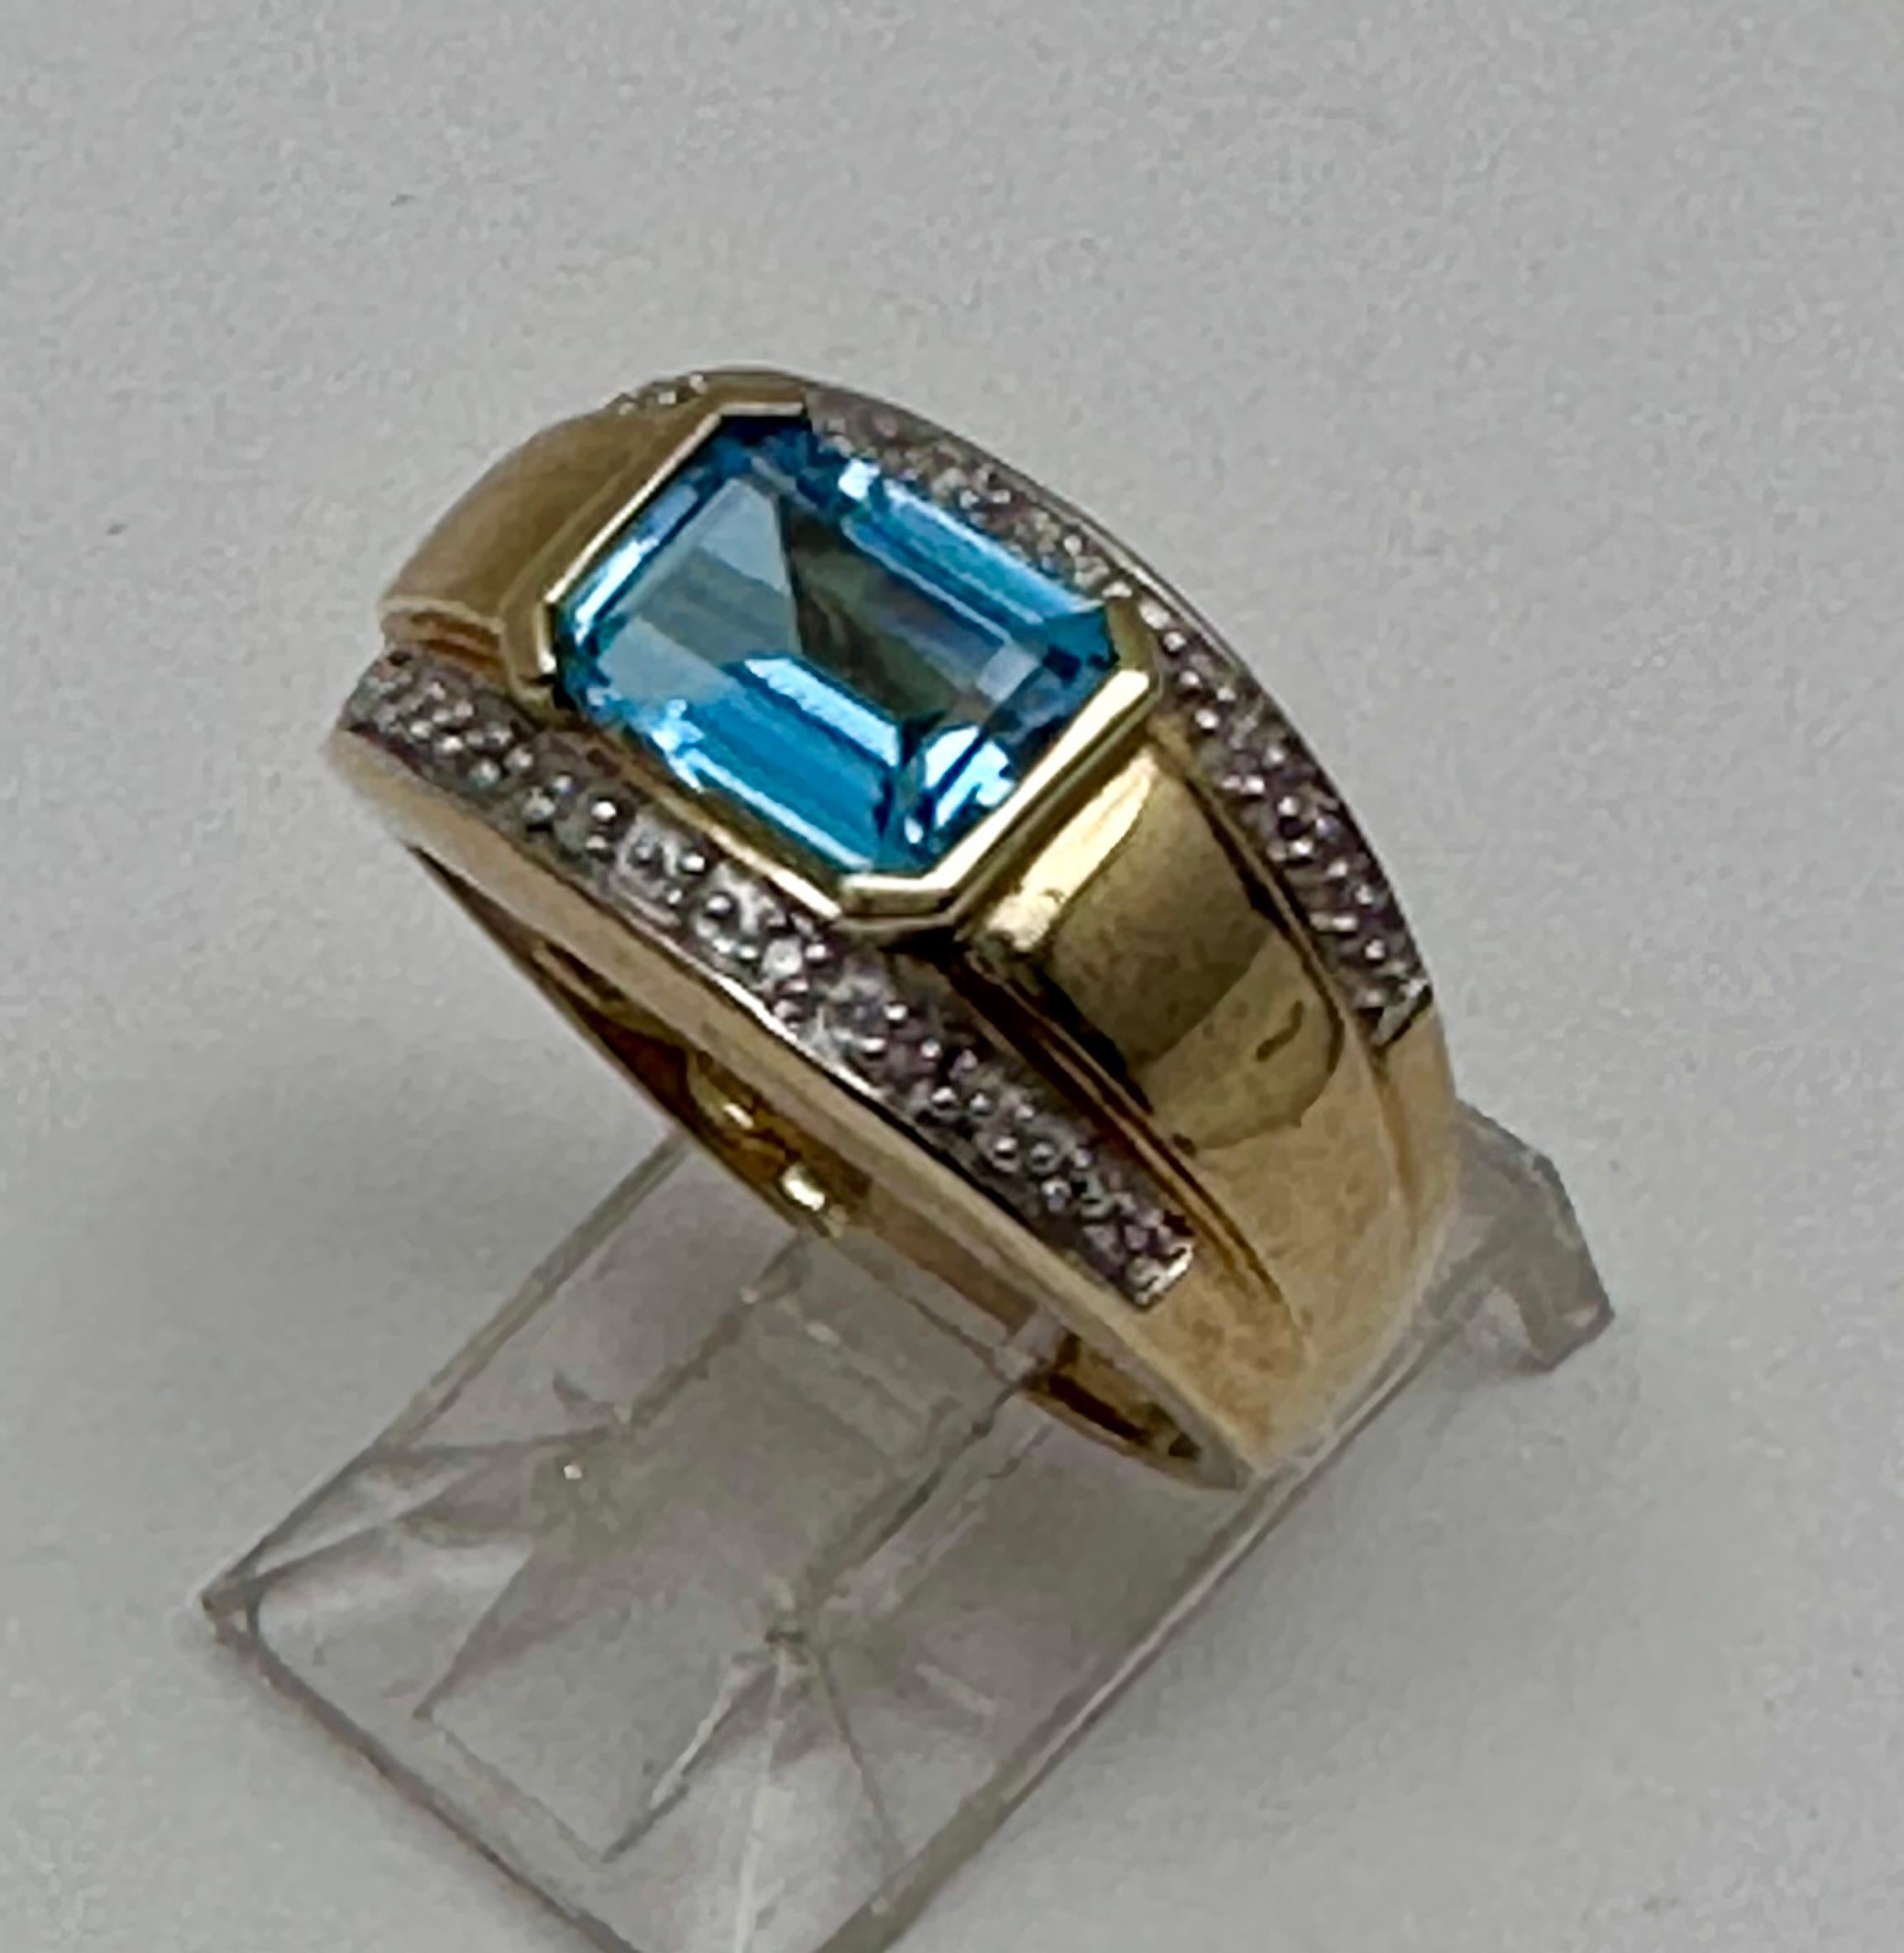 10k Yellow Gold 6mm x 8mm Emerald Cut Blue Topaz Diamond Ring Size 7

Blue Topaz Meaning:

This vivacious blue gemstone is known as the stone of clarity. The Blue Topaz meaning allows you to channel your inner wisdom and find the perfect pathways to